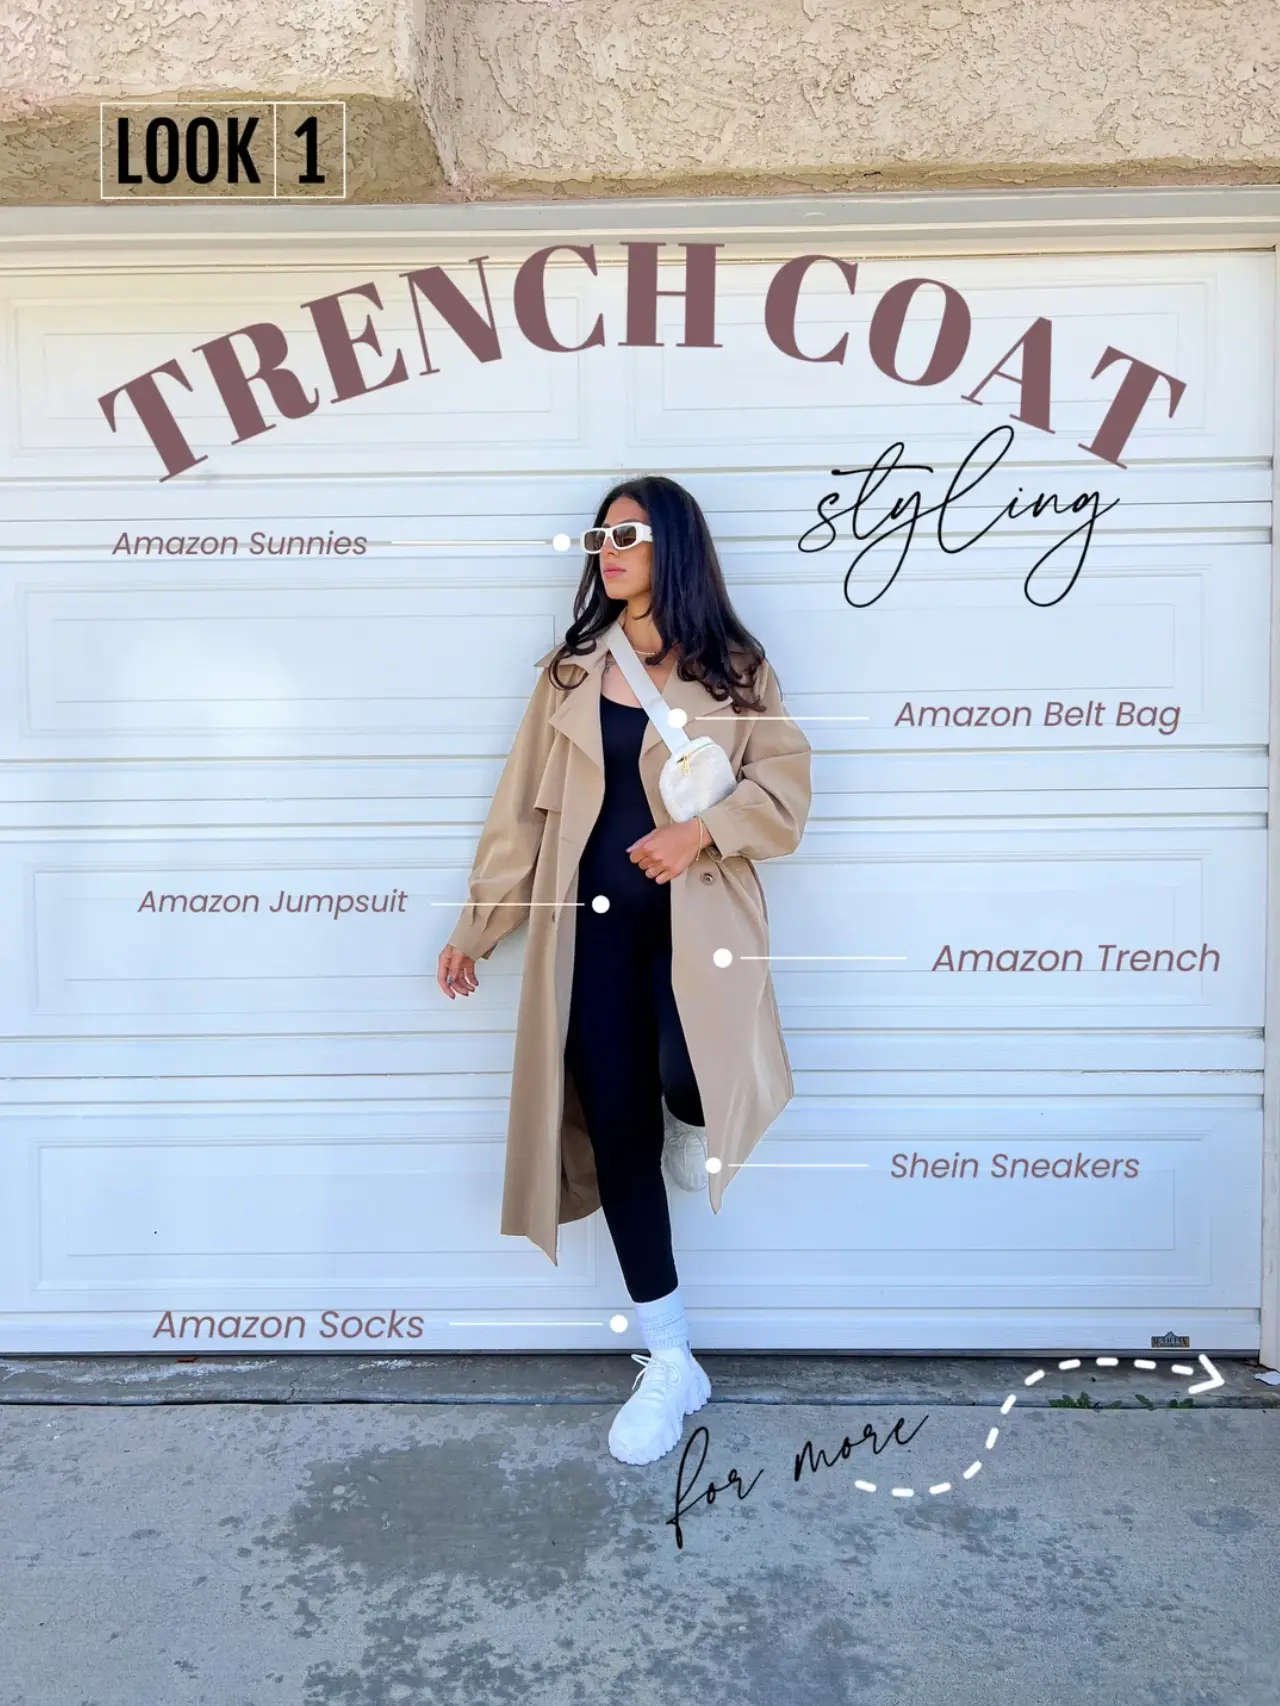 Trench coat autumn outfit ideas 🍂🤎😳 Yes or no?